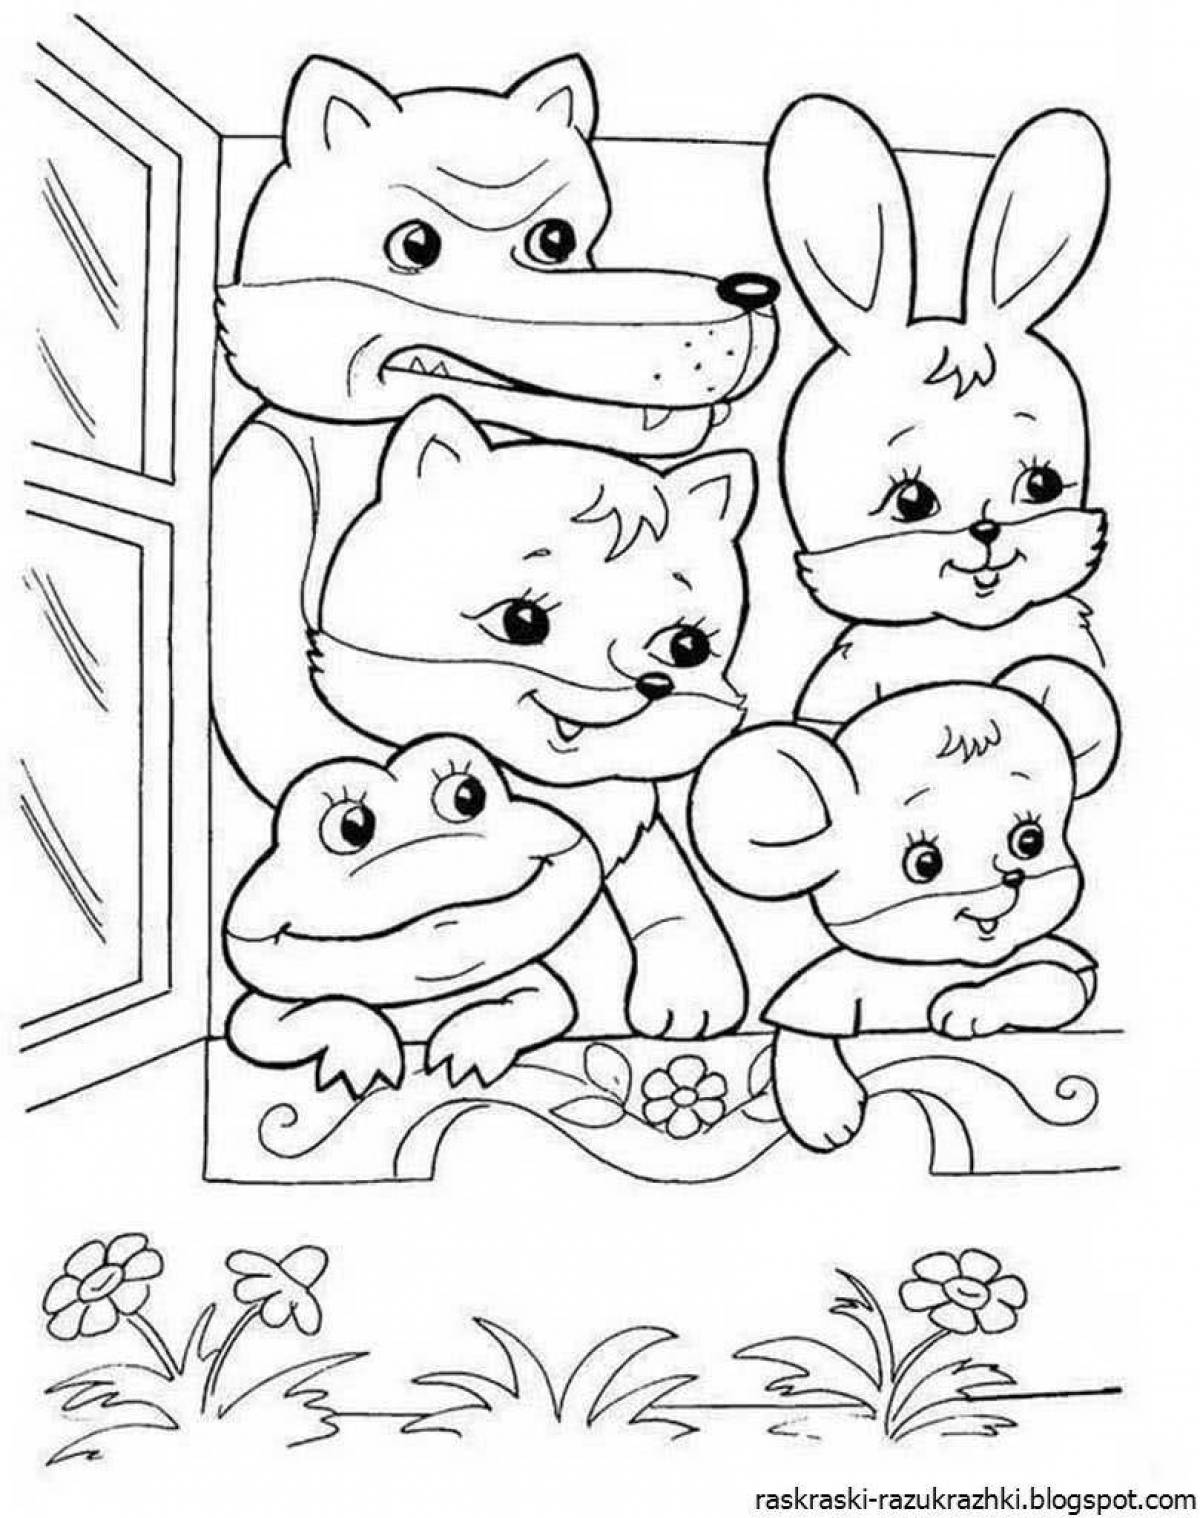 Fabulous coloring pages for kids